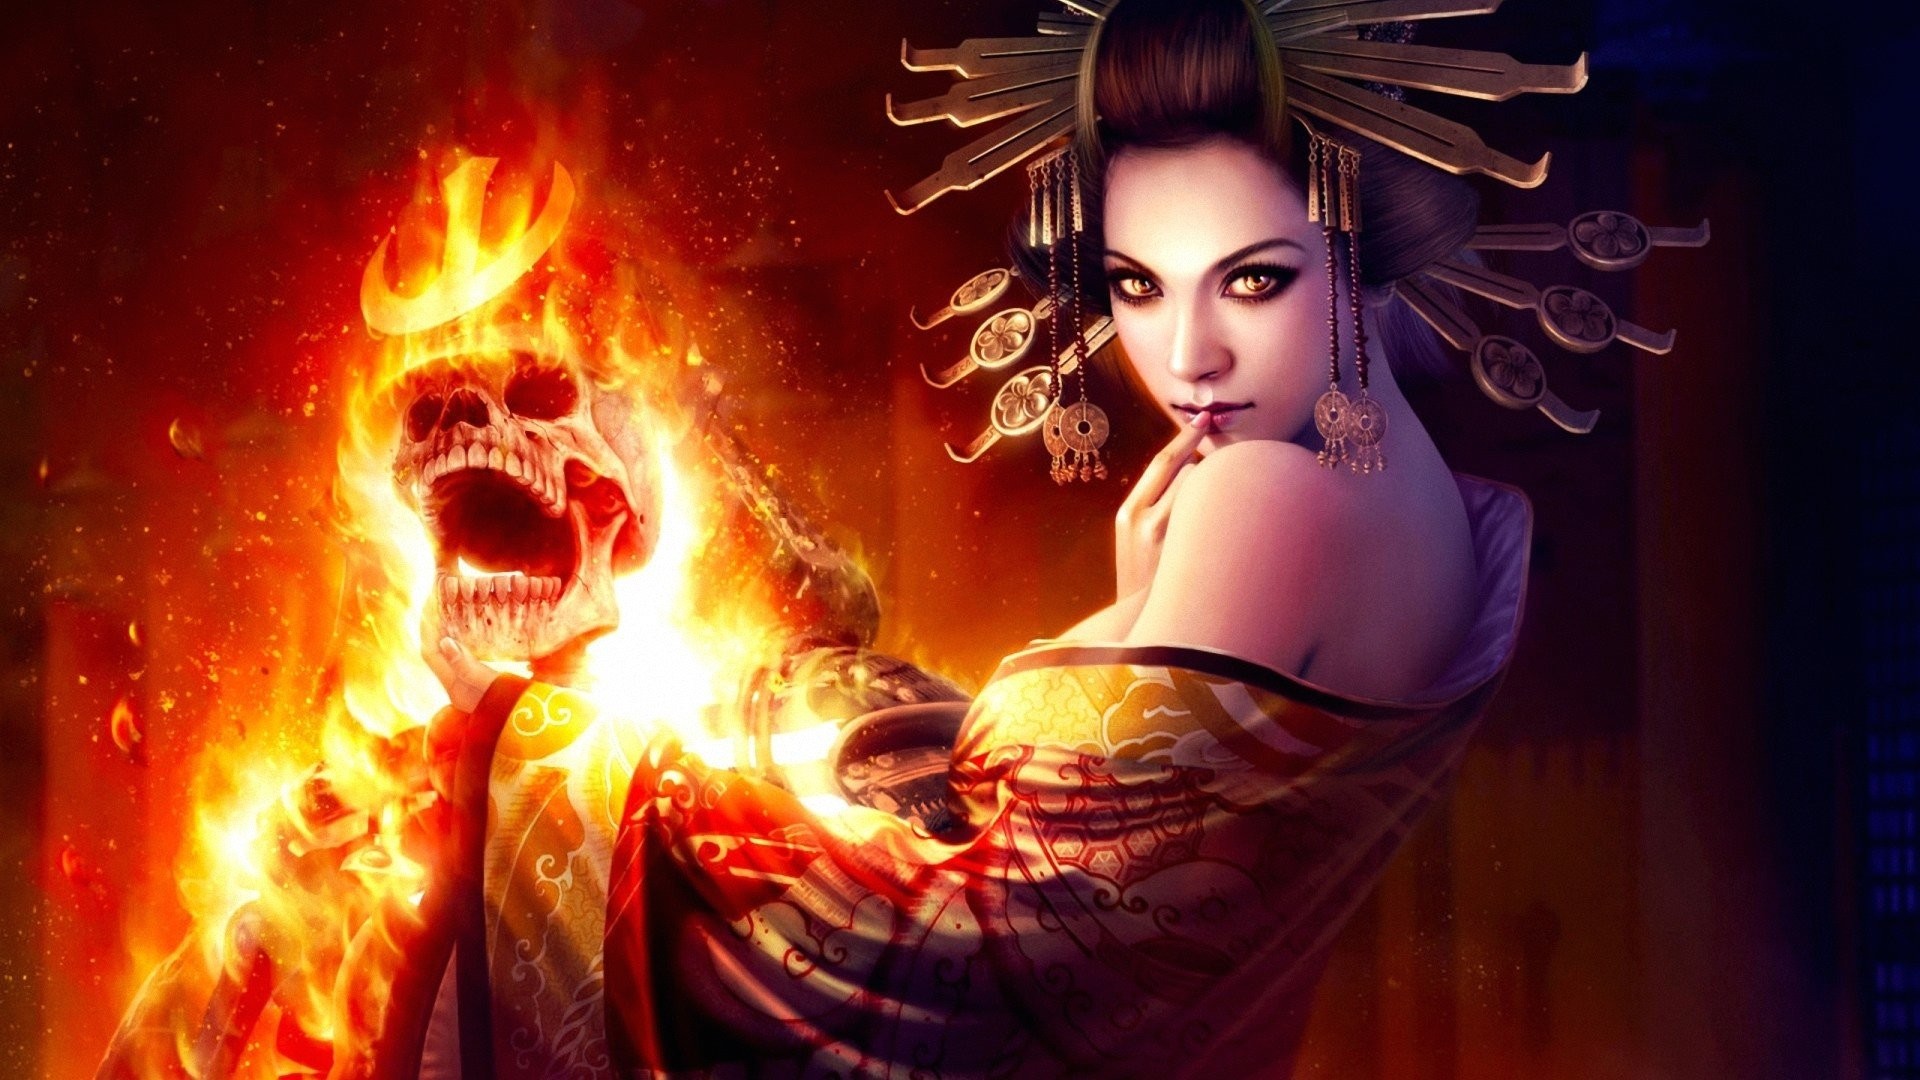 1920x1080 Wallpaper amletic girl fire and fantasy